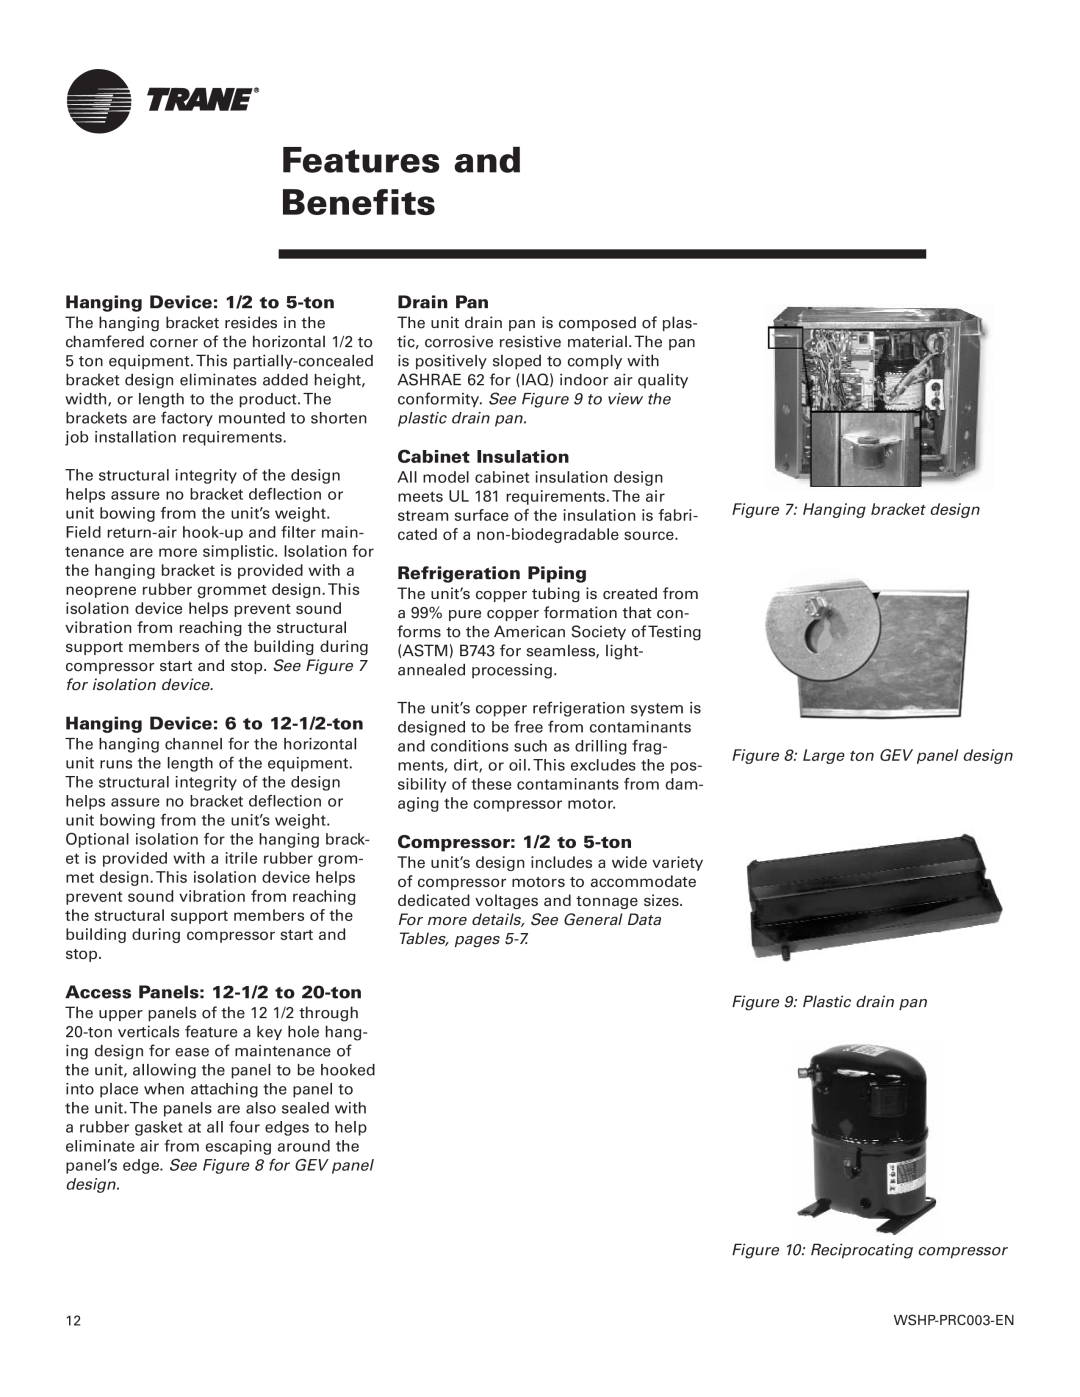 Trane Model 180 GEV, 120 GEH Features and Benefits, Hanging Device 1/2 to 5-ton, Hanging Device 6 to 12-1/2-ton, Drain Pan 